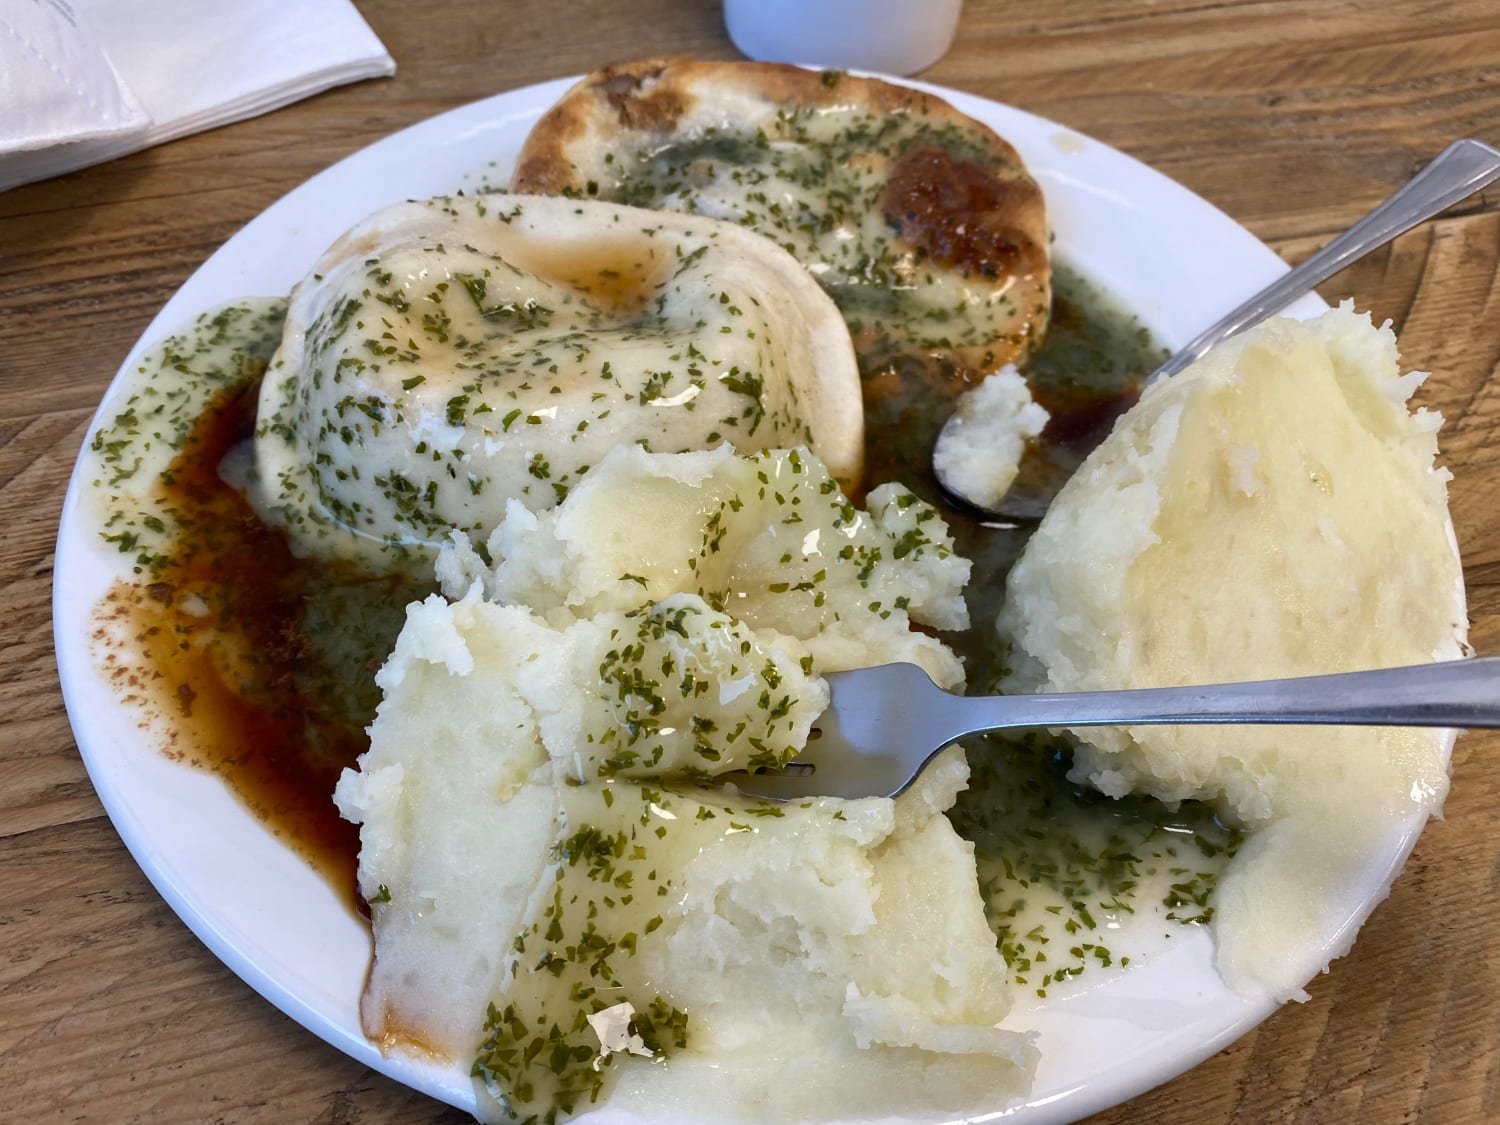 We have a F Cooke’s Pie and Mash shop just opened in Bishops Stortford, Hertfordshire, UK. If you’re local to the area, definitely worth a try if you love traditional pie and mash! Really recommend!